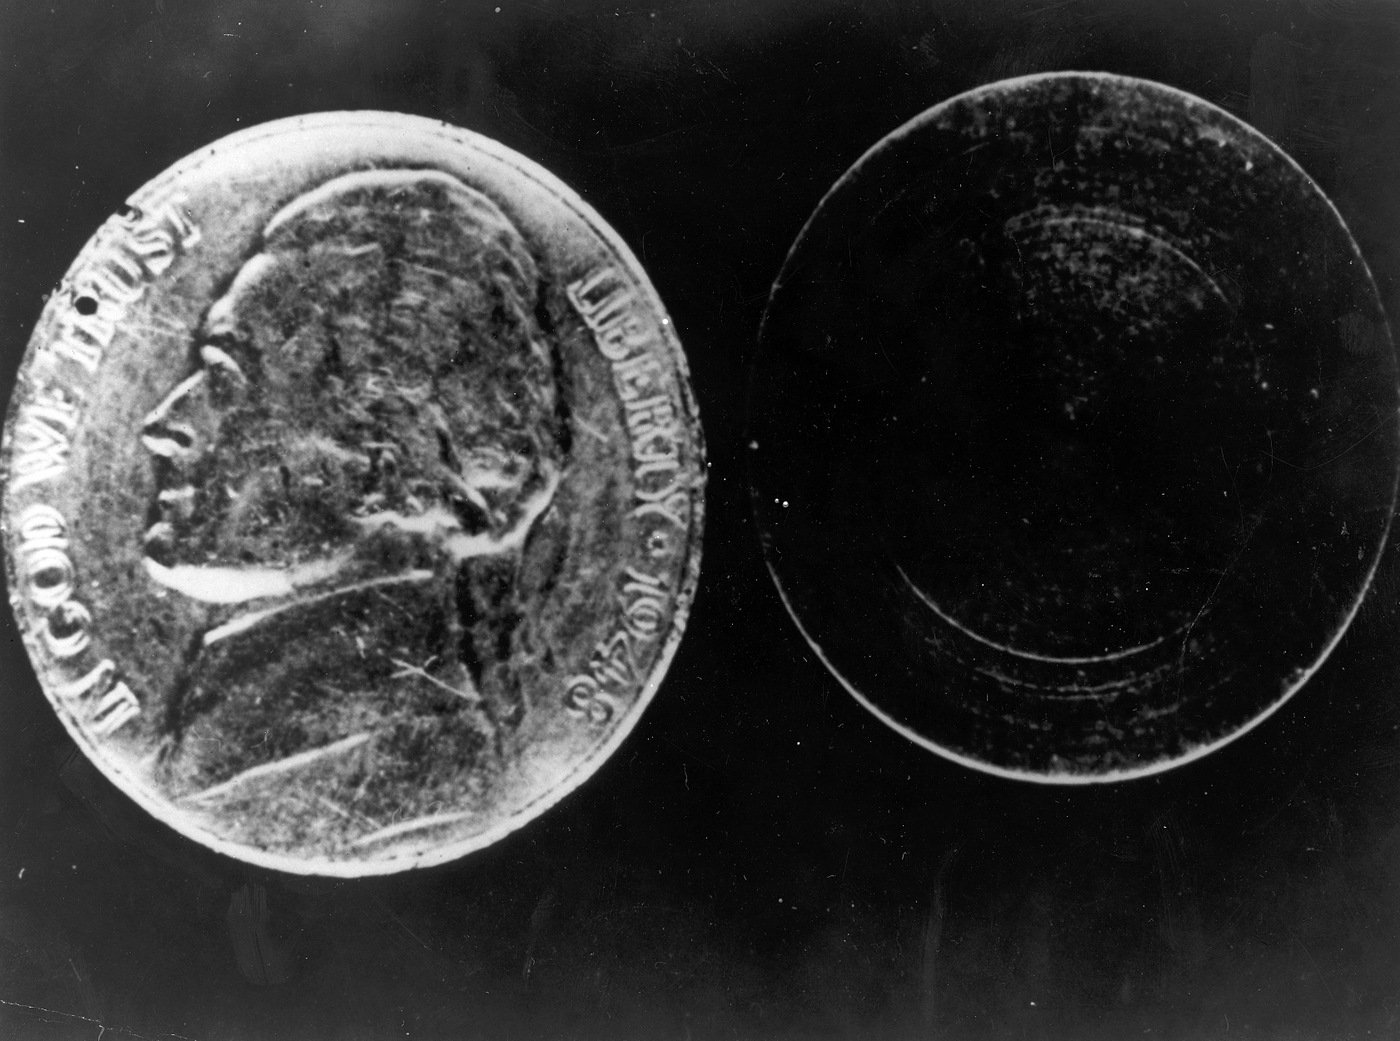 A hollow nickel used as tradecraft by Soviet spies to convey coded messages.